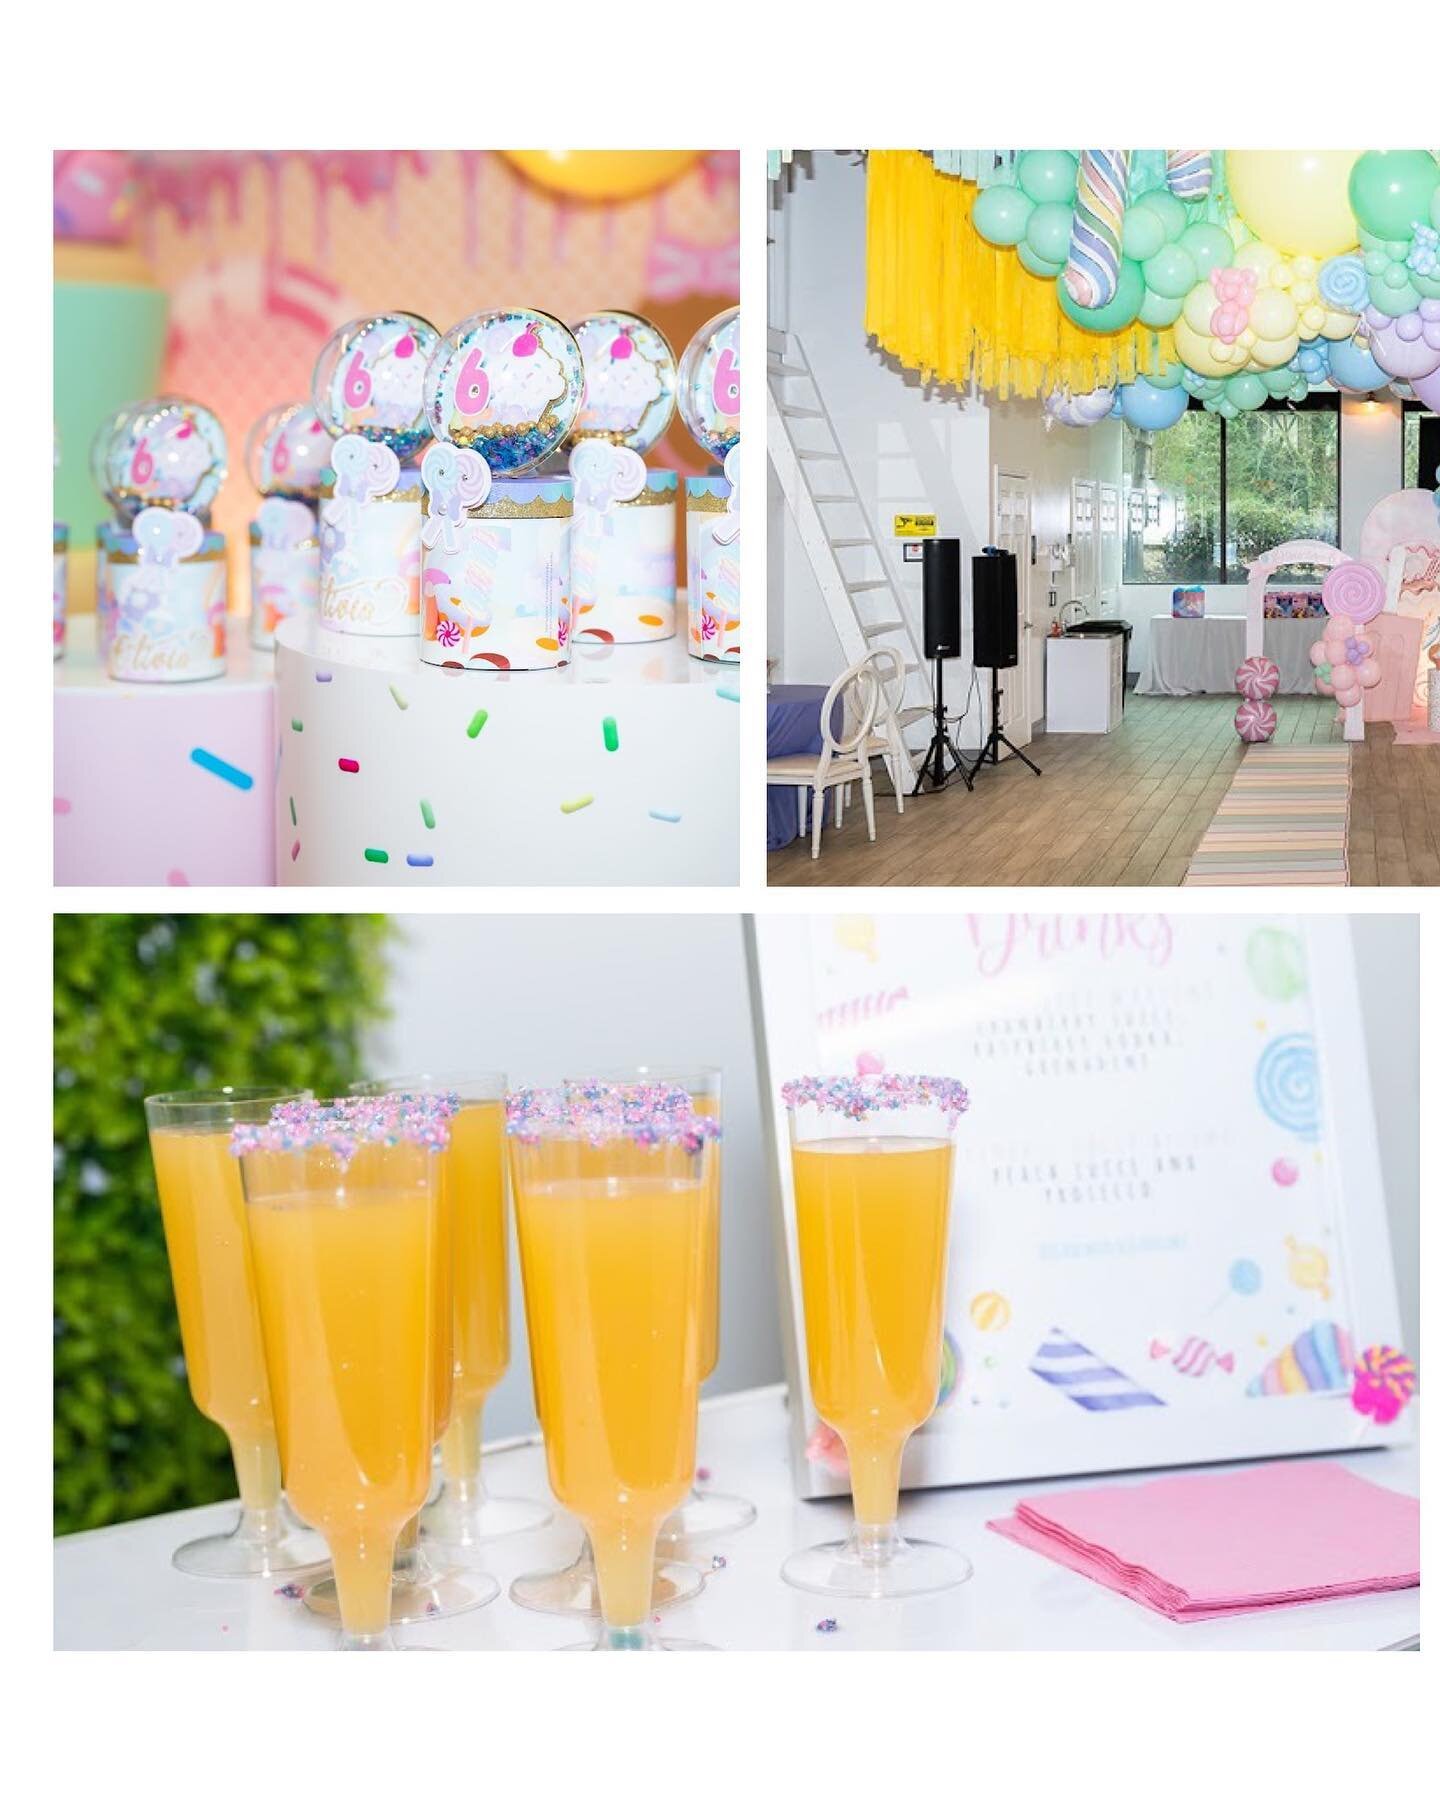 sweet little deets 🍬🍭🍬🍭
 
I can go on and on about the details from this birthday party. 

To highlight a few there were custom cookies, a flavorful pastel color palette throughout the venue, imported chairs, fresh cotton candy, party hosts and t